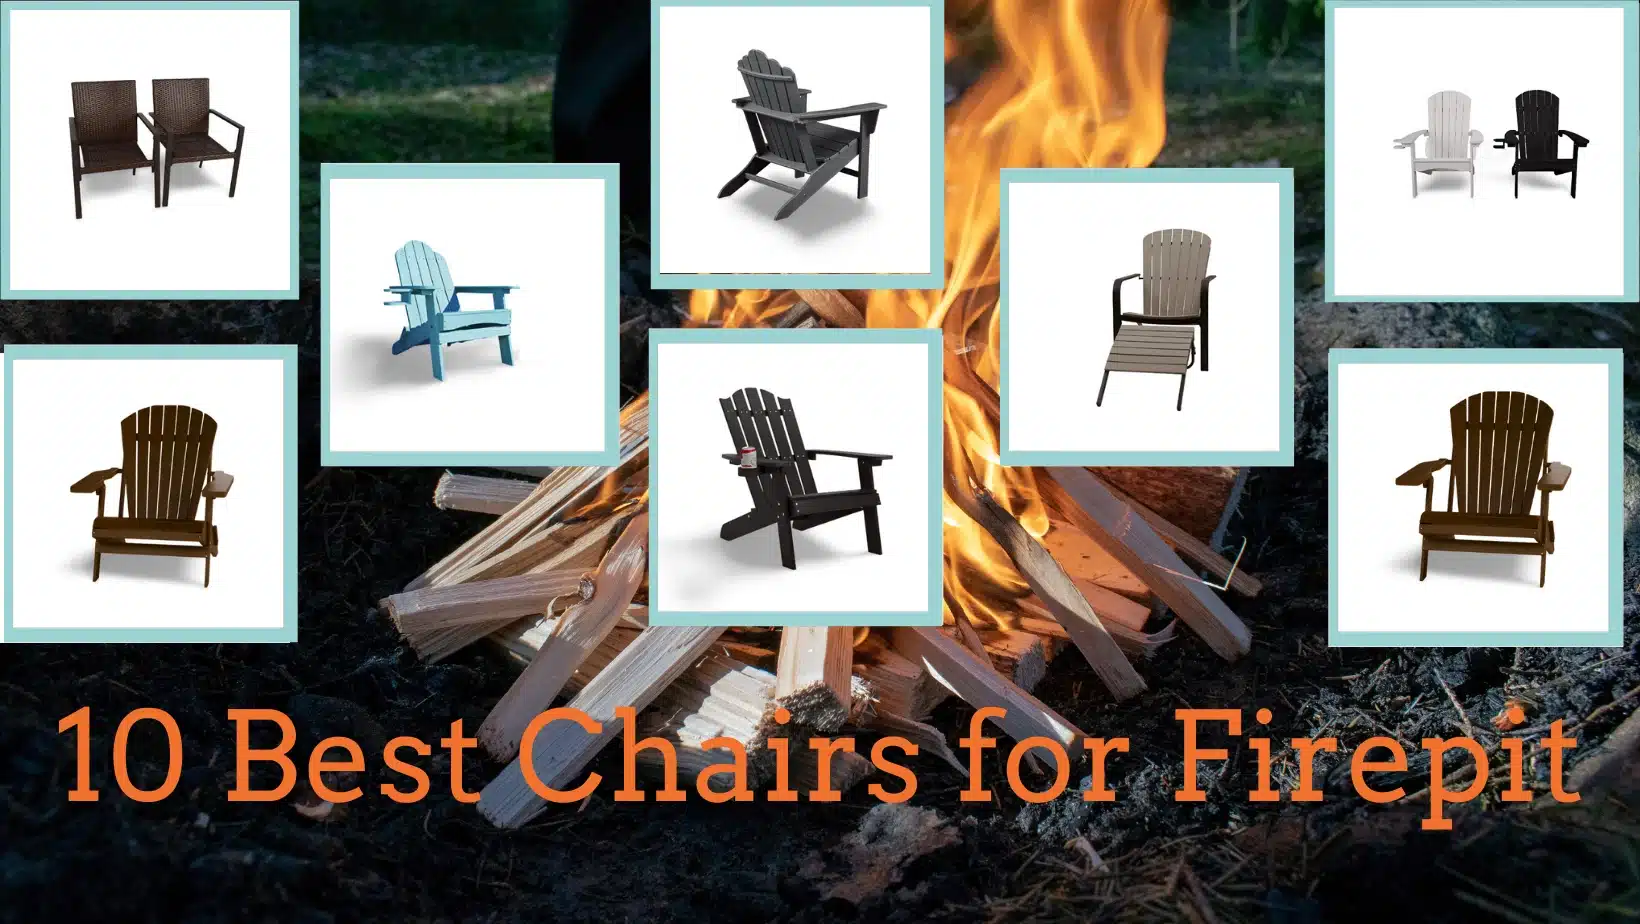 10 Best Chair for Firepit